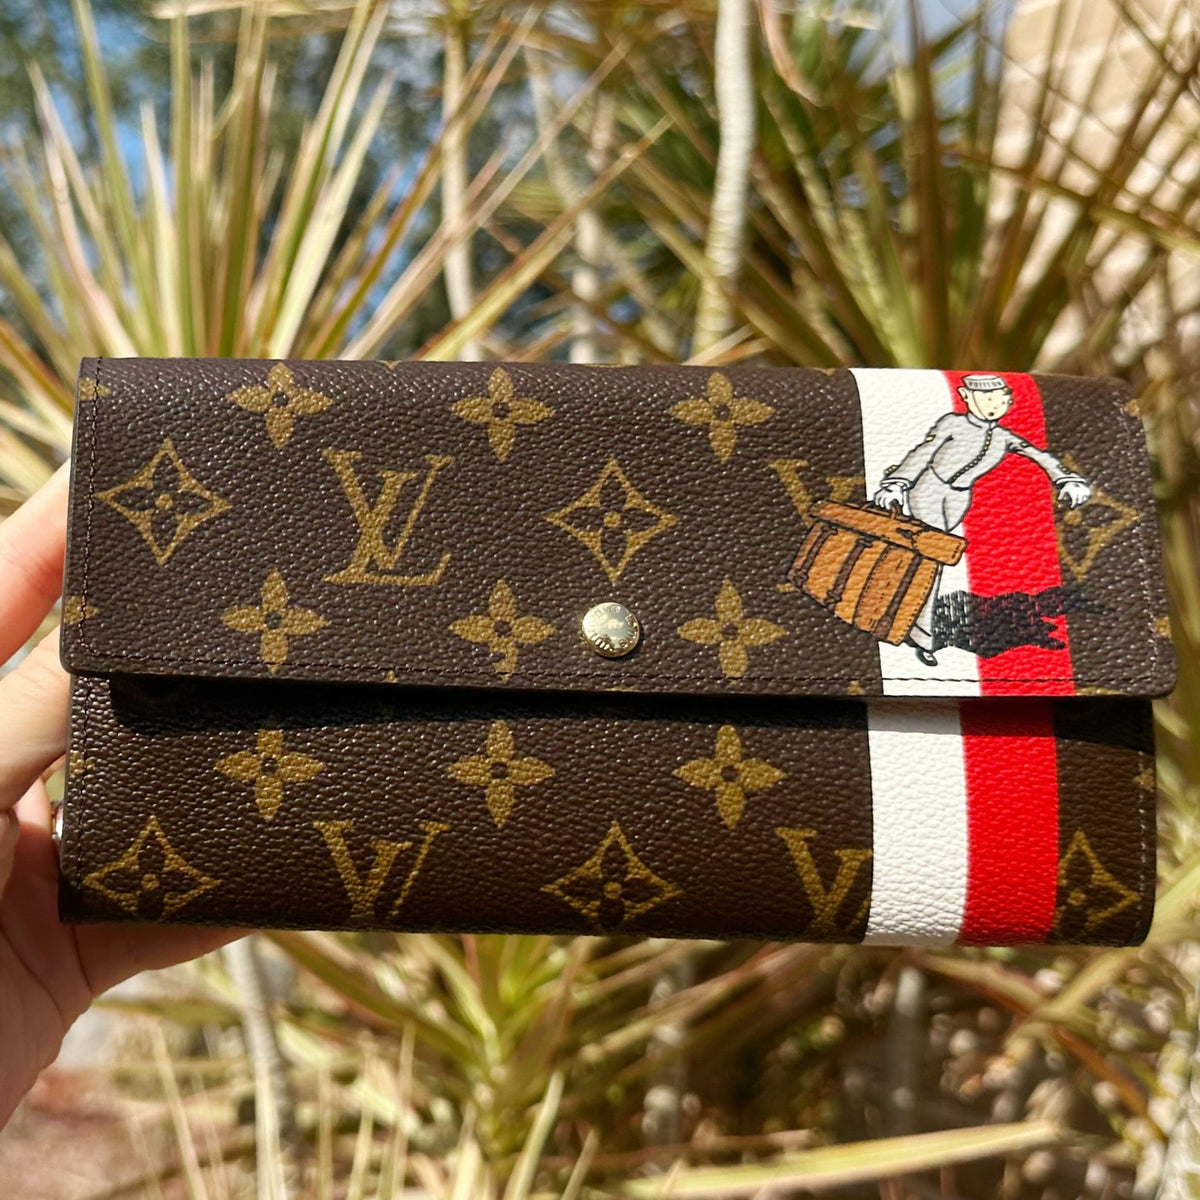 Louis Vuitton Limited Groom Compact Wallet